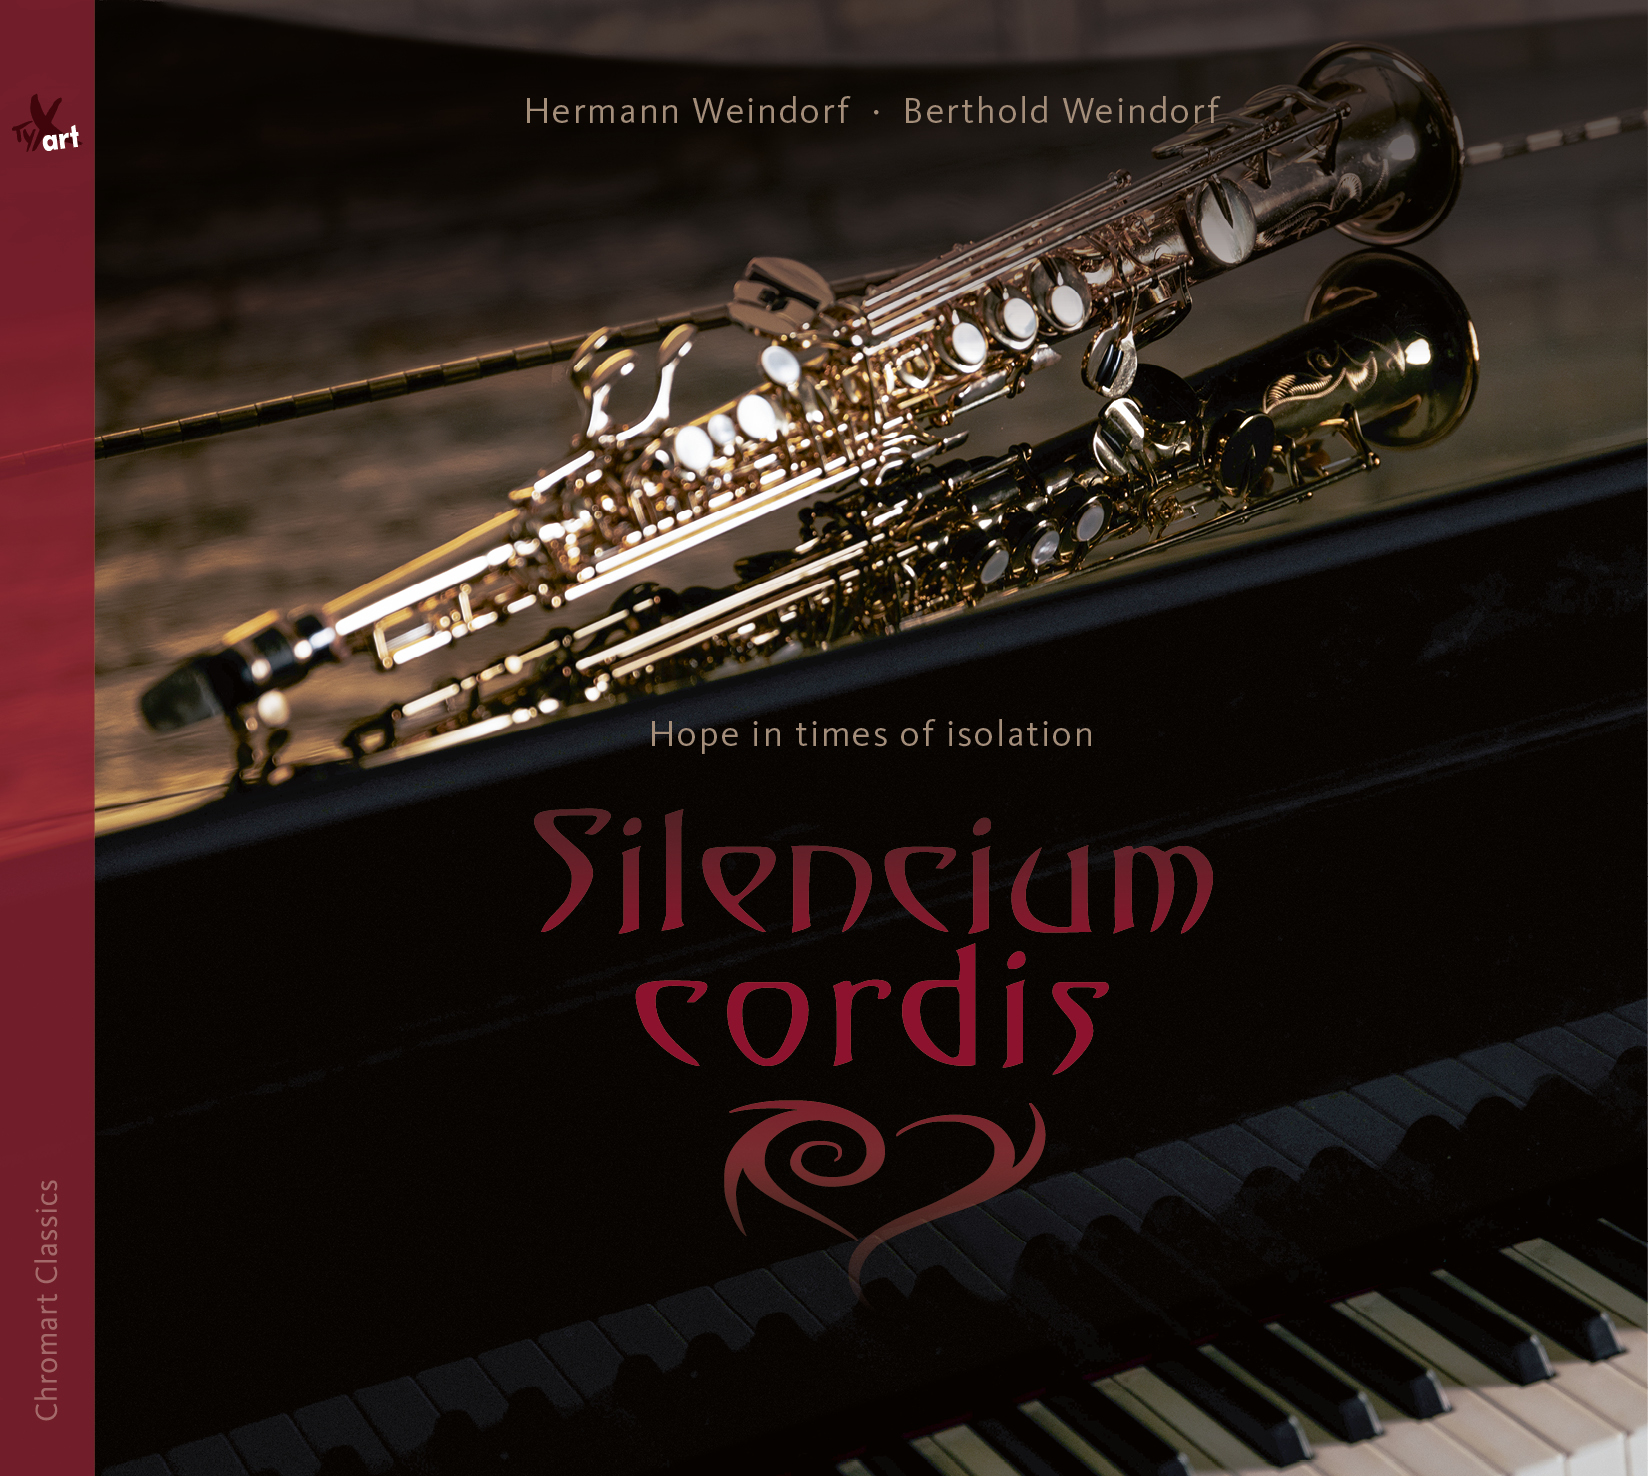 Silencium cordis - Works for Saxophone and Piano - Weindorf & Weindorf